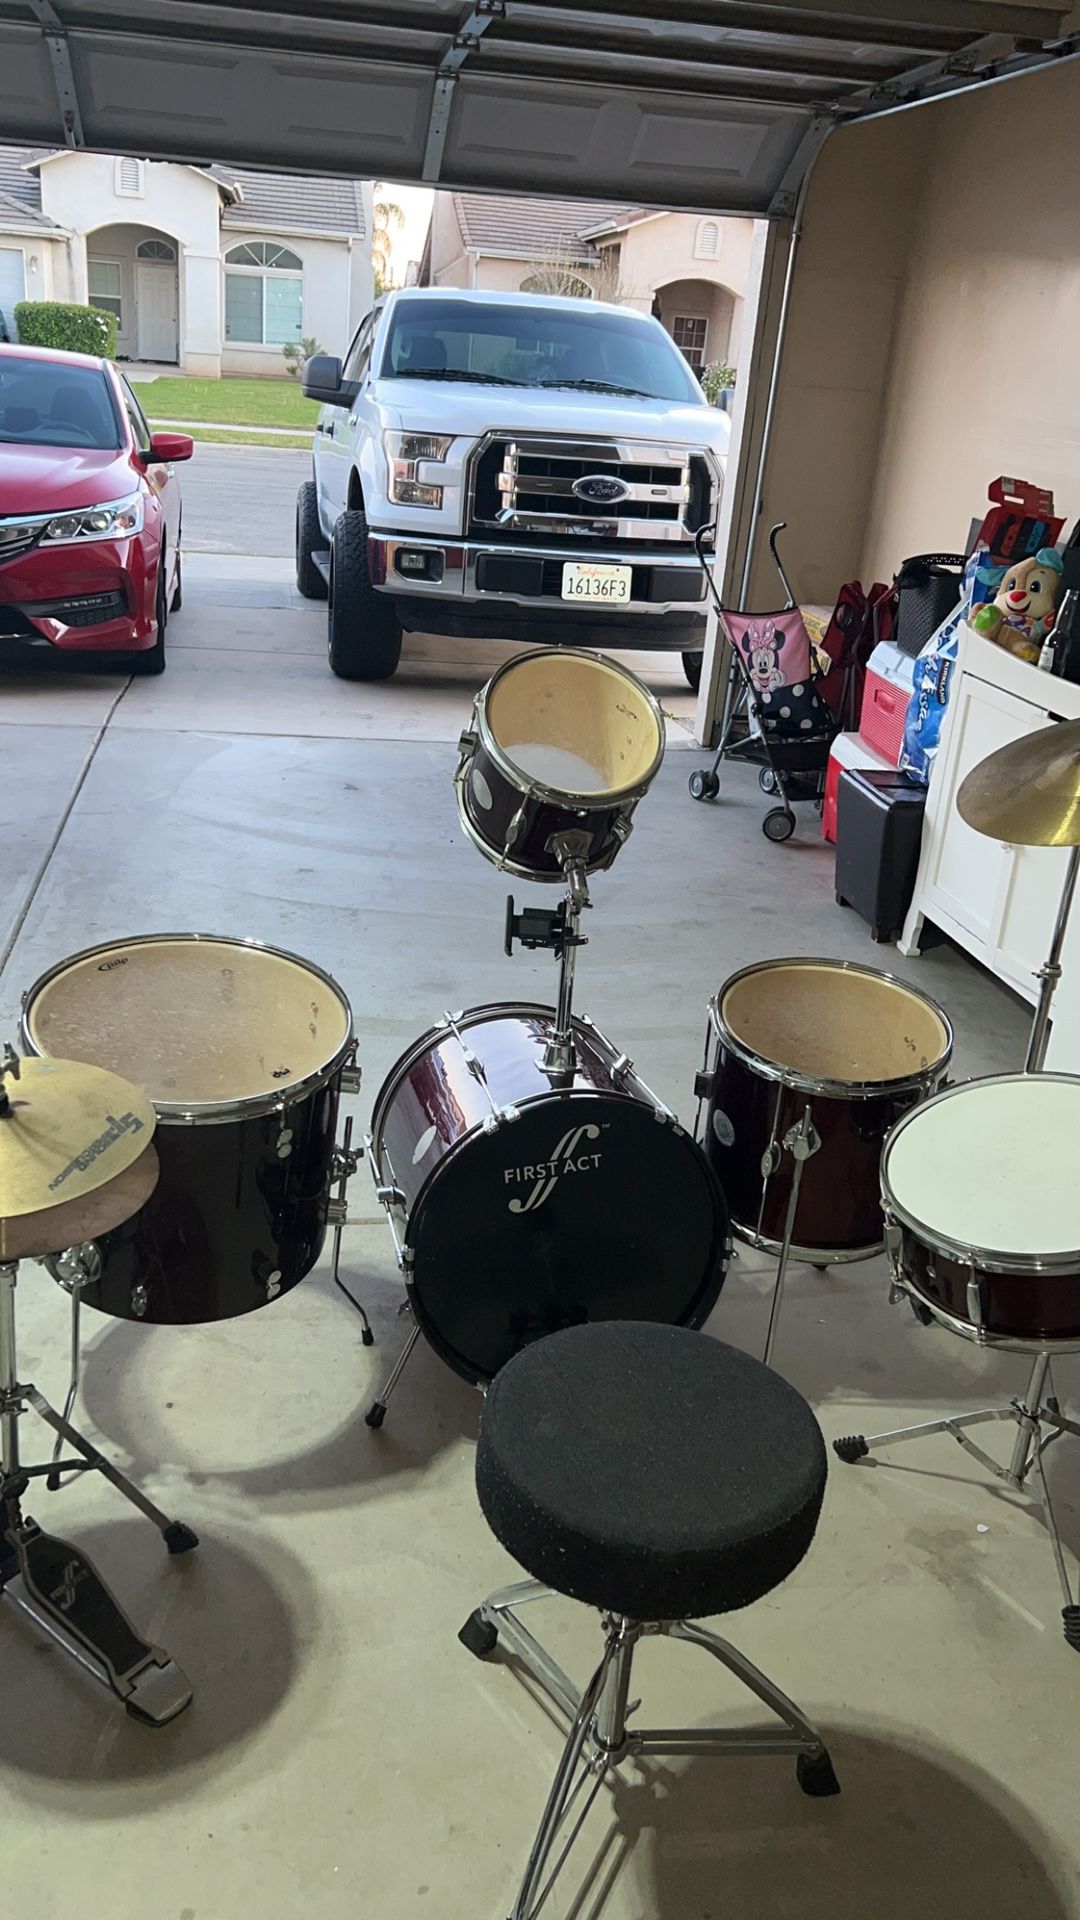 First Act Drum Set $230